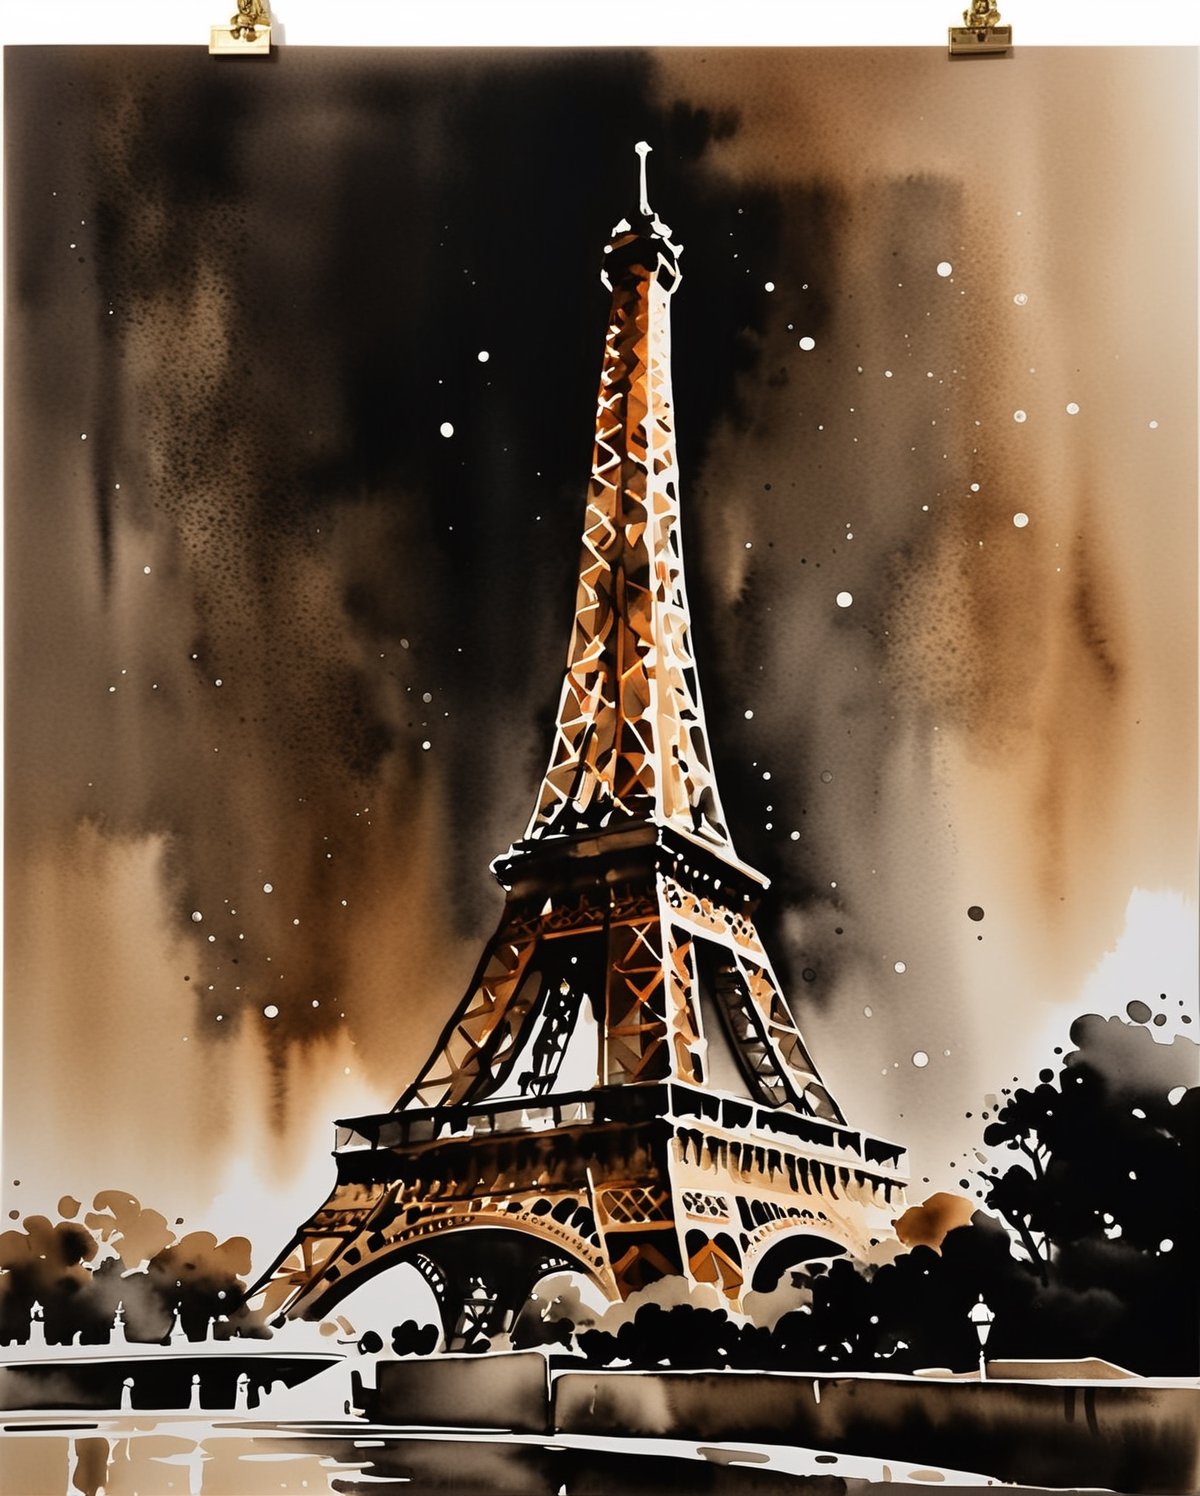 A stunning fusion of Chinese ink wash technique and Western perspective, featuring the iconic Eiffel Tower. The painting is characterized by fluid, expressive brushstrokes and a dynamic composition, reflecting the essence of Chinese landscape painting. The tower's architectural grandeur is accentuated by the use of chiaroscuro, adding depth and dimension to the scene. The harmonious blend of Eastern and Western aesthetics creates a captivating visual narrative that transcends cultural boundaries.